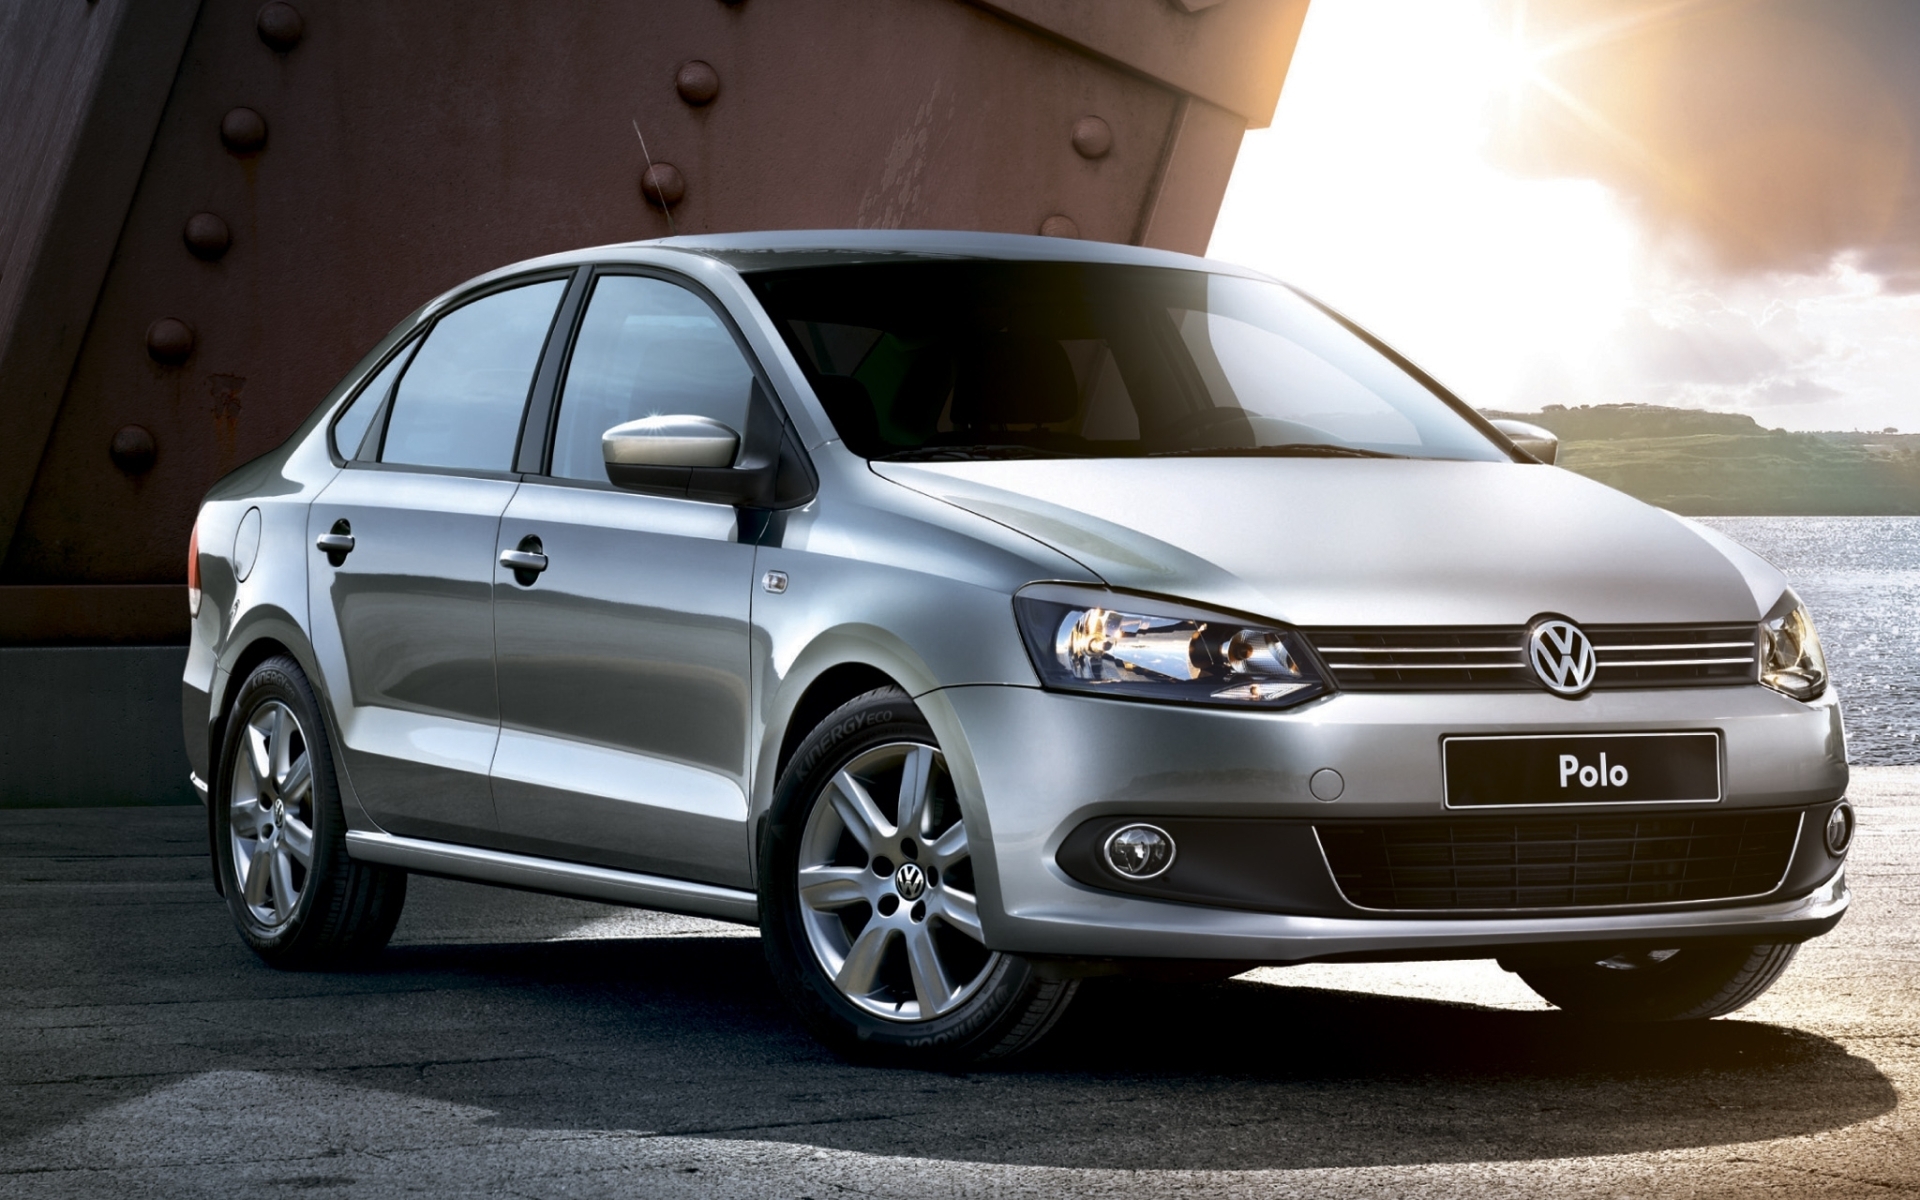 Wallpapers Volkswagen Polo Silver on the desktop